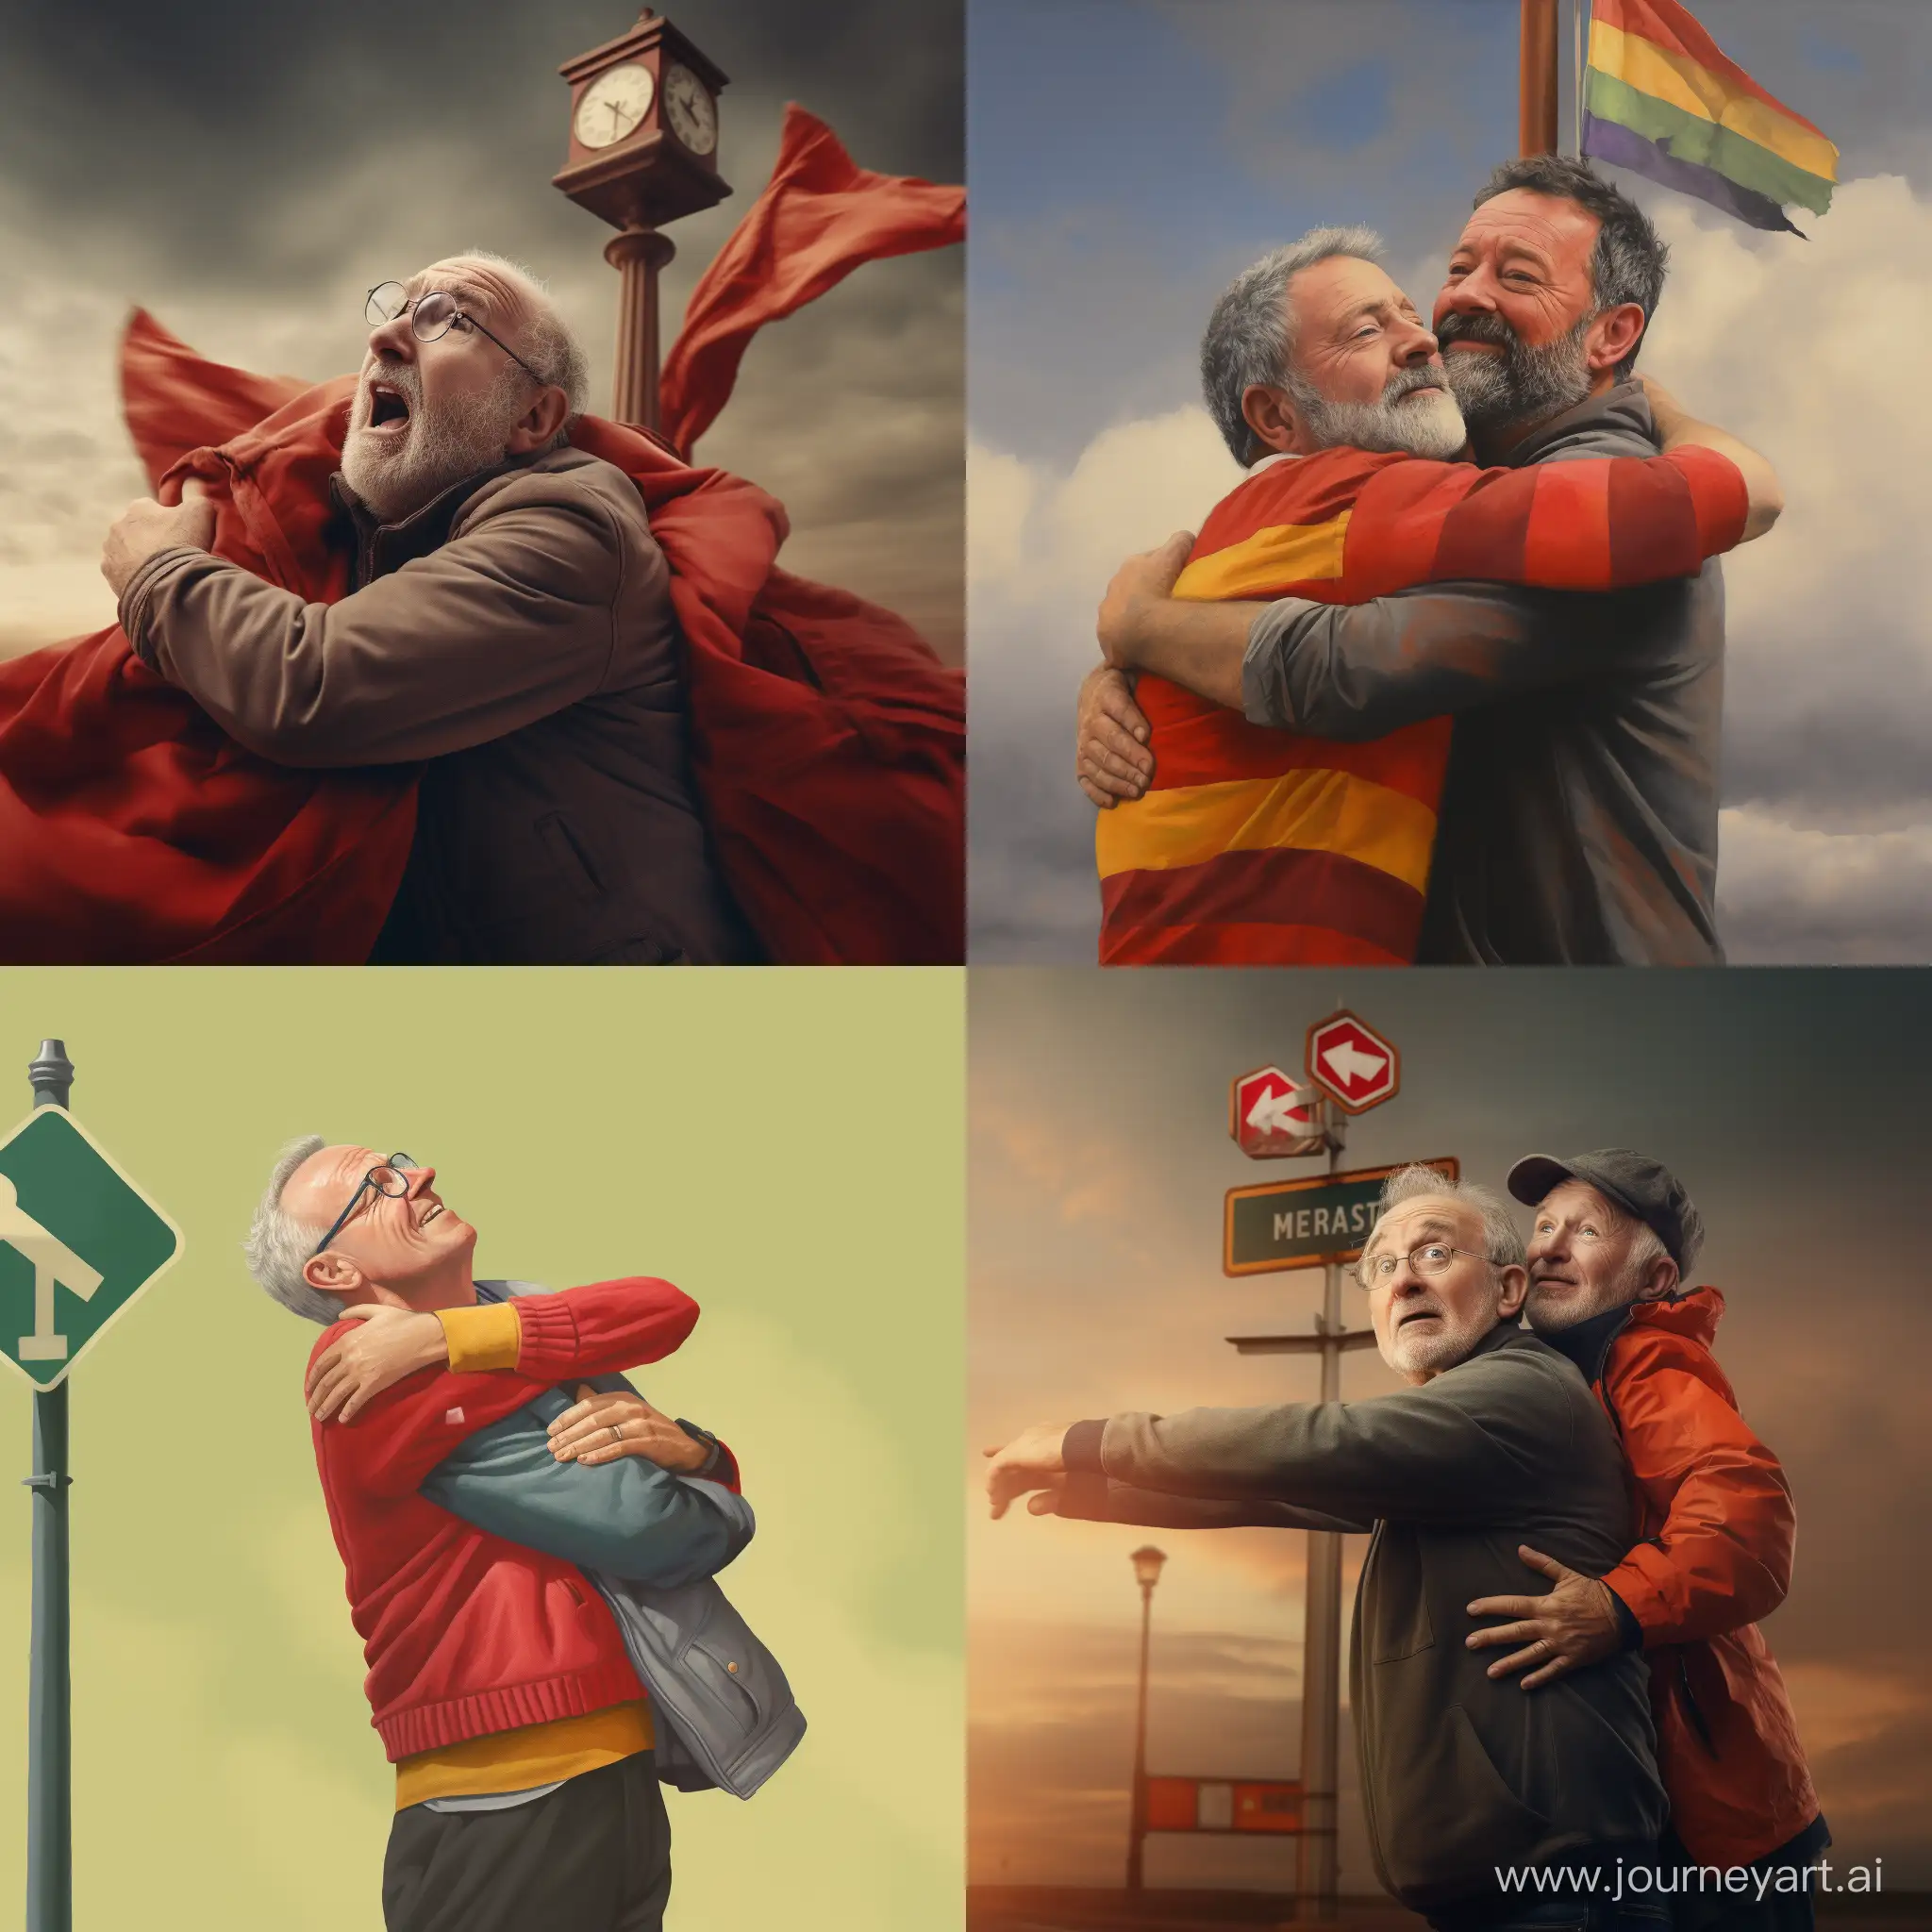 Passionate-Semaphore-Hug-by-Man-in-His-50s